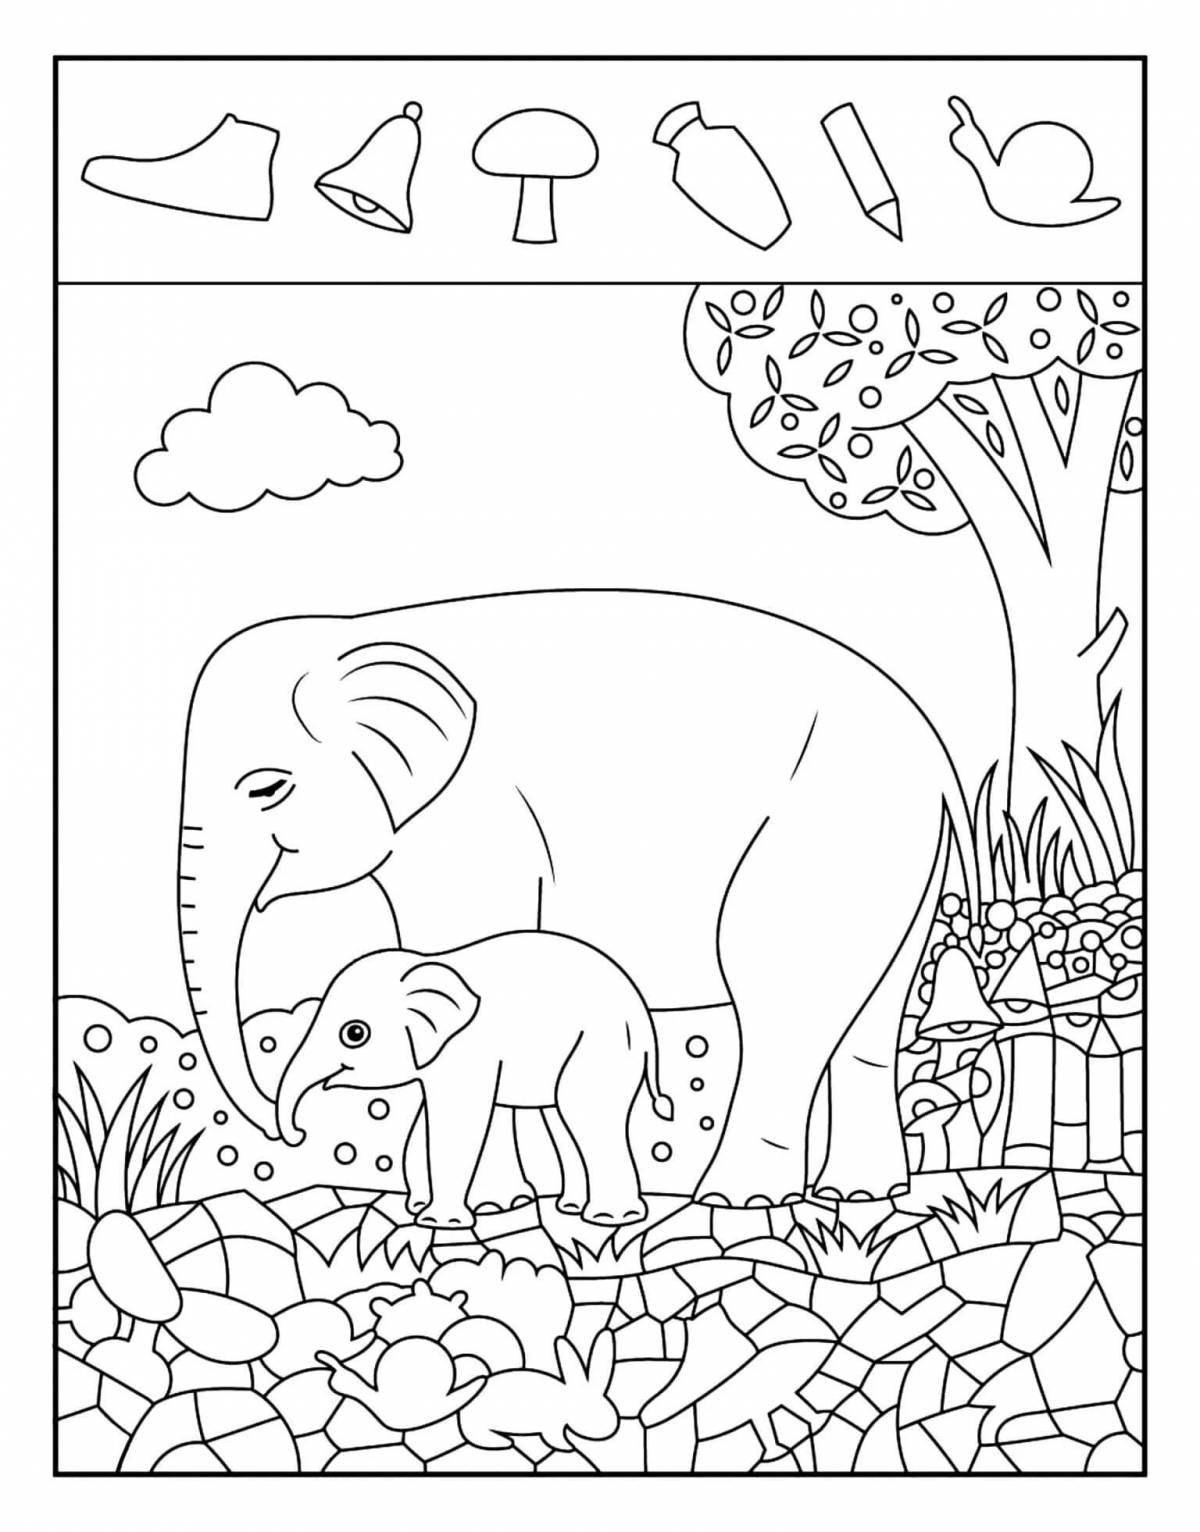 Find the animals incredible coloring book